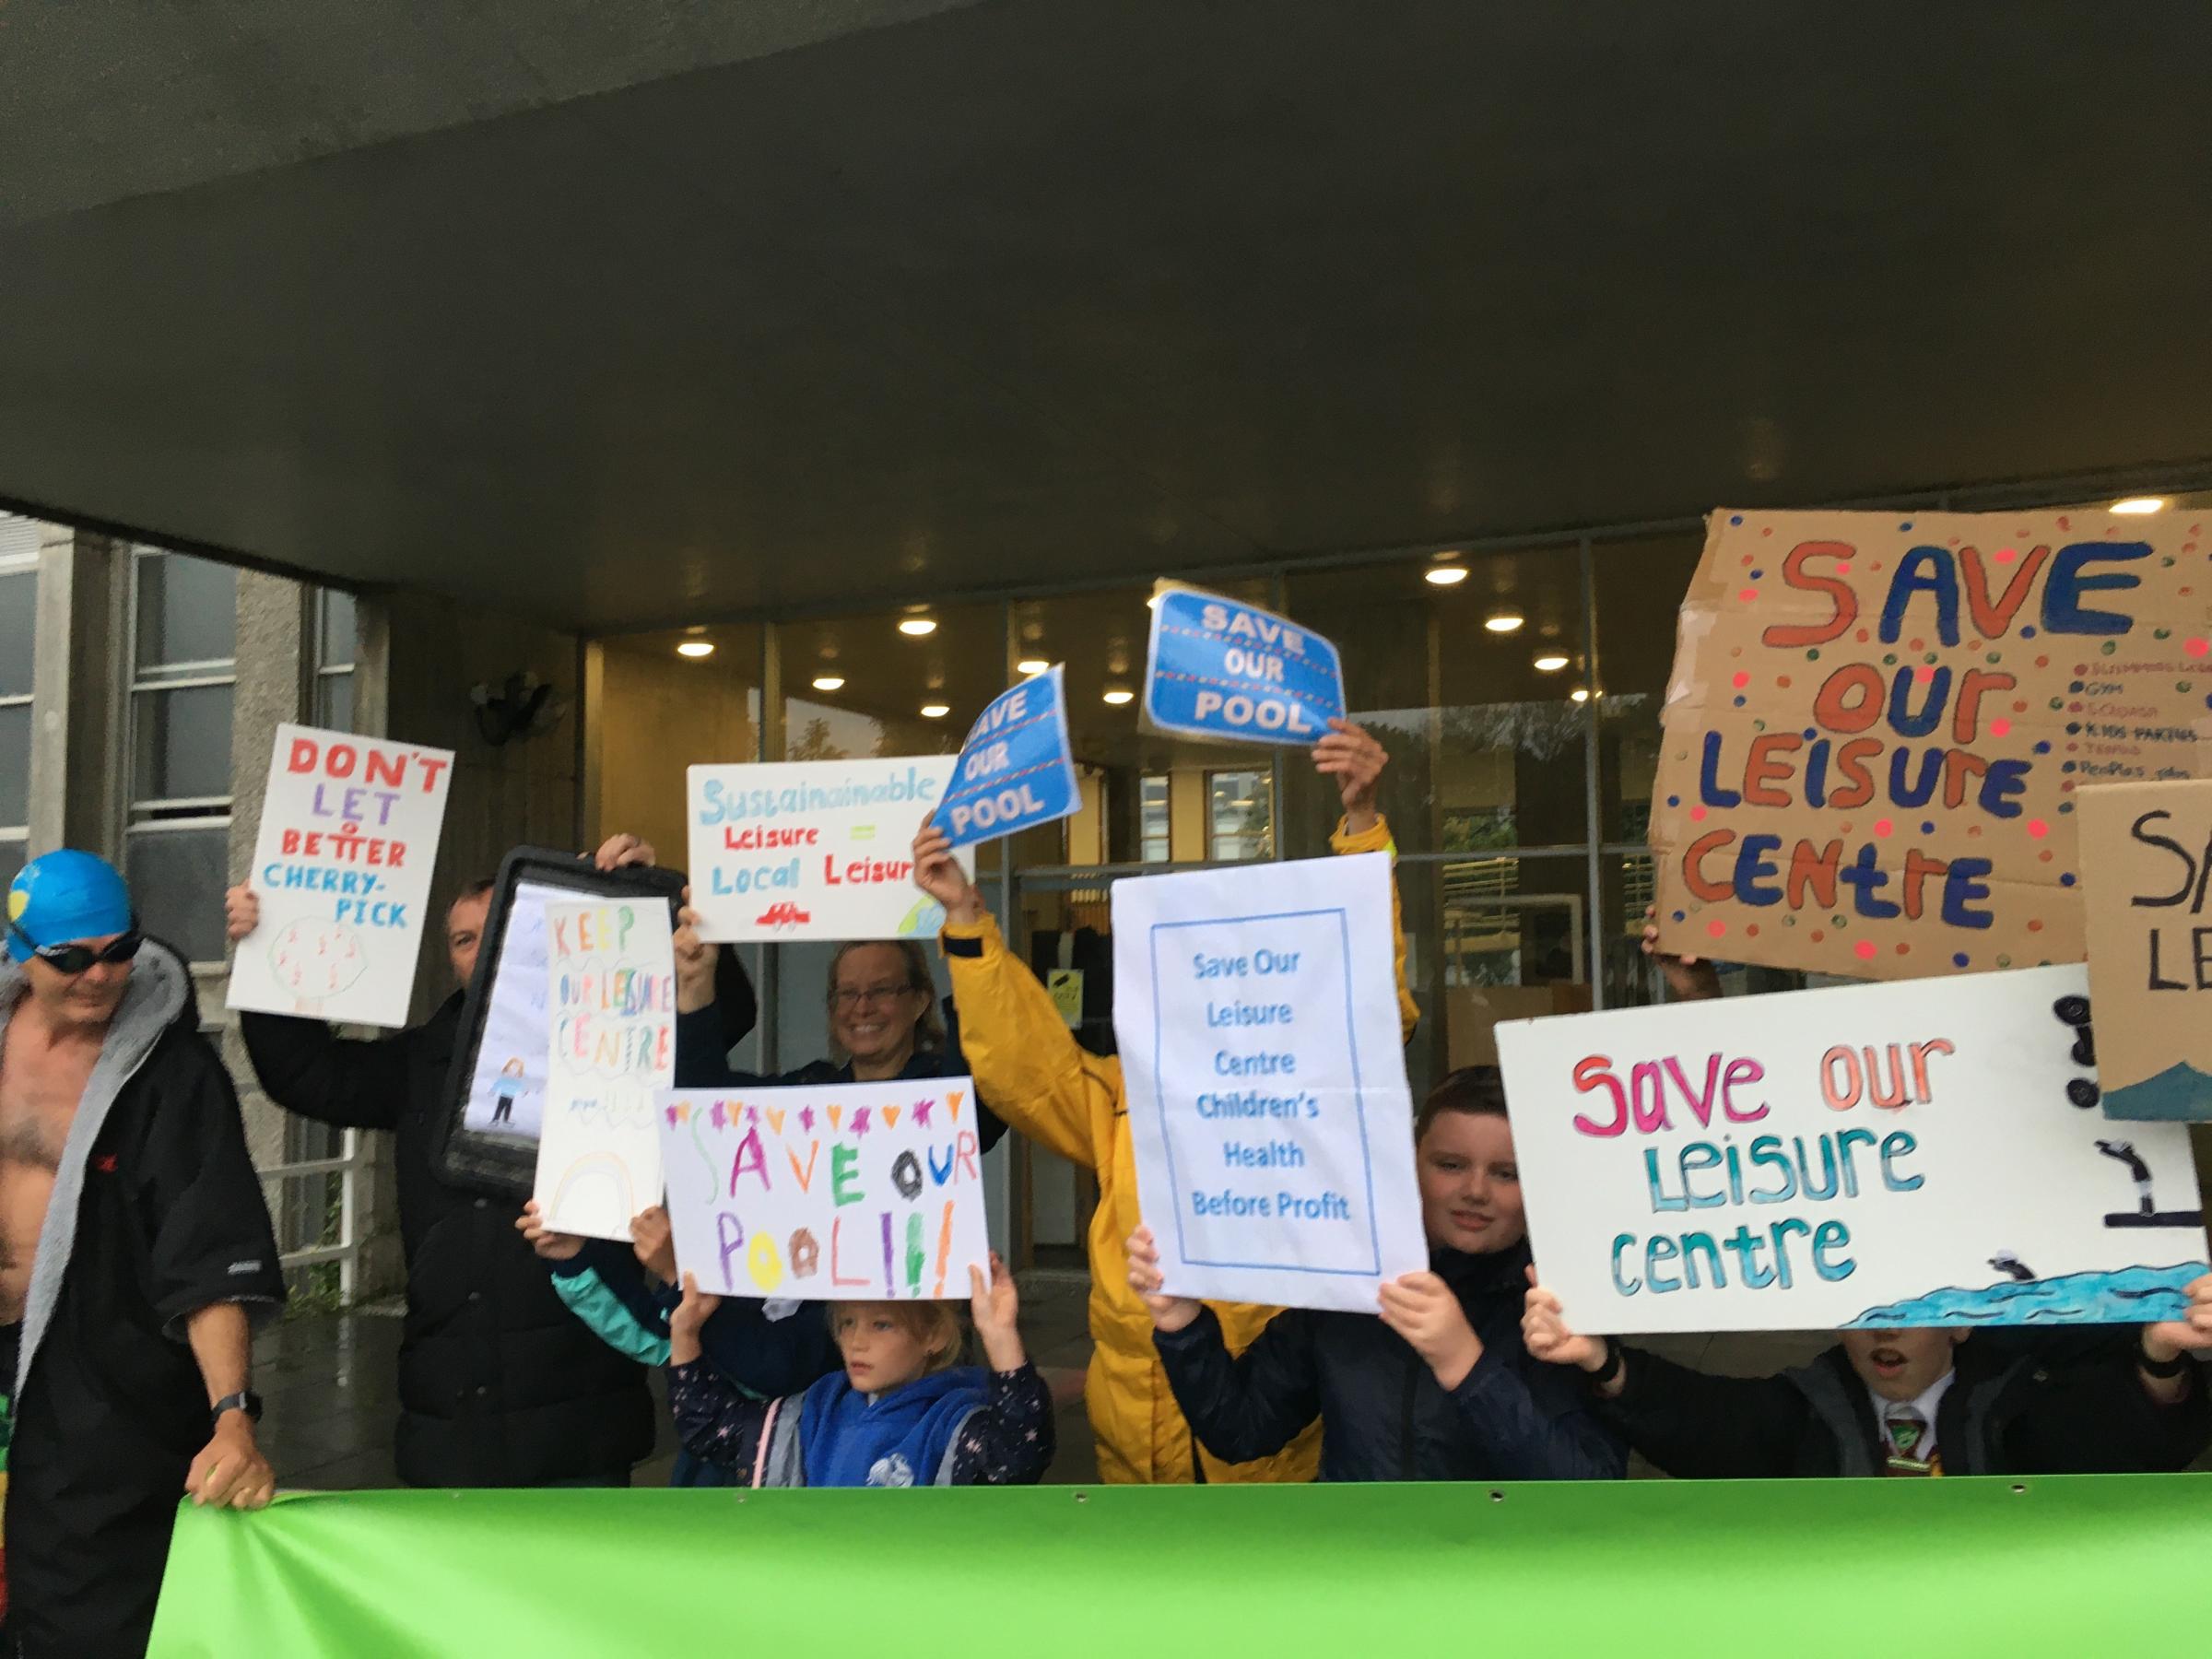 The leisure centre protest at County Hall, Truro (Image: Richard Whitehouse/LDRS)